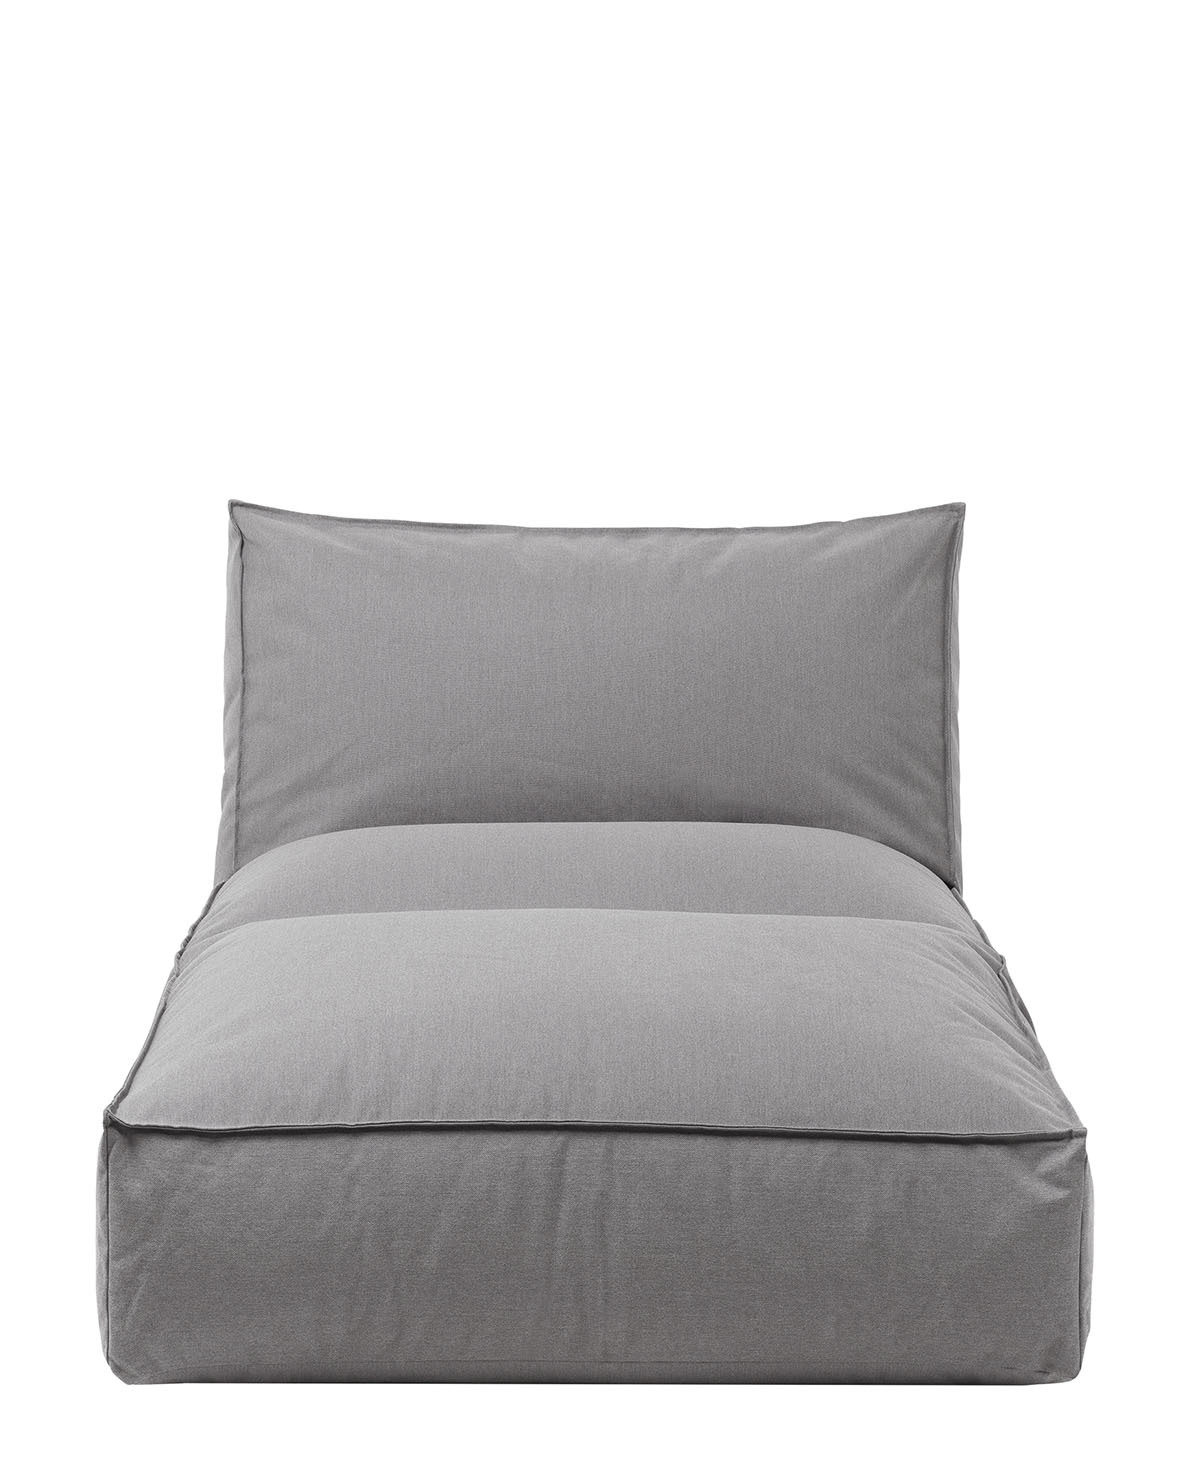 blomus bett daybed stay outdoor 80 cm b stone